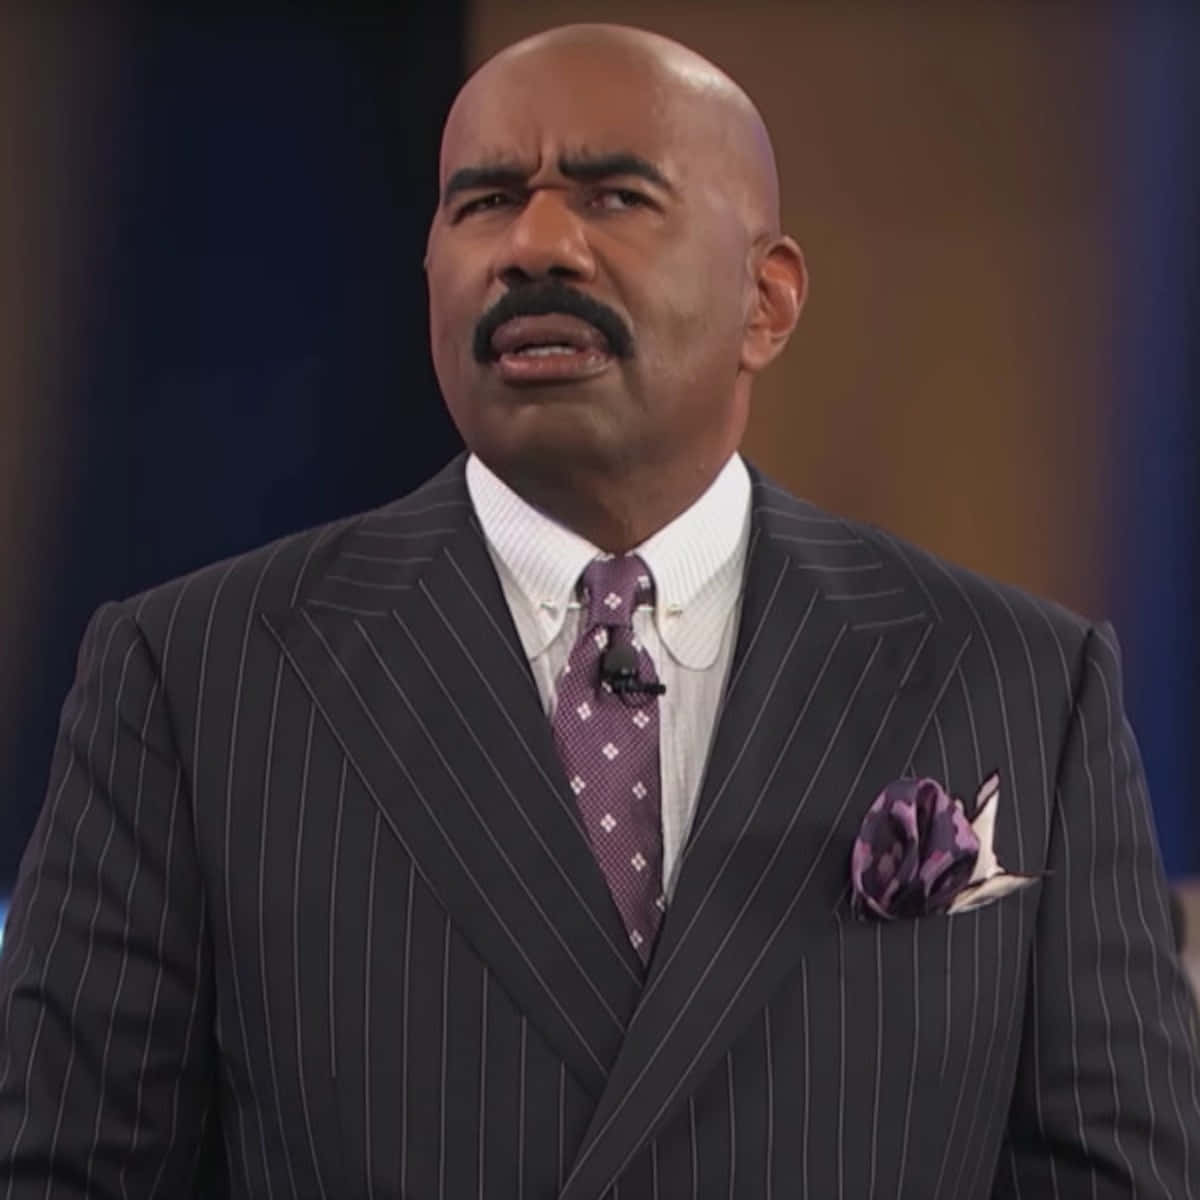 Comedian And Tv Host Steve Harvey With A Surprised Expression. Background